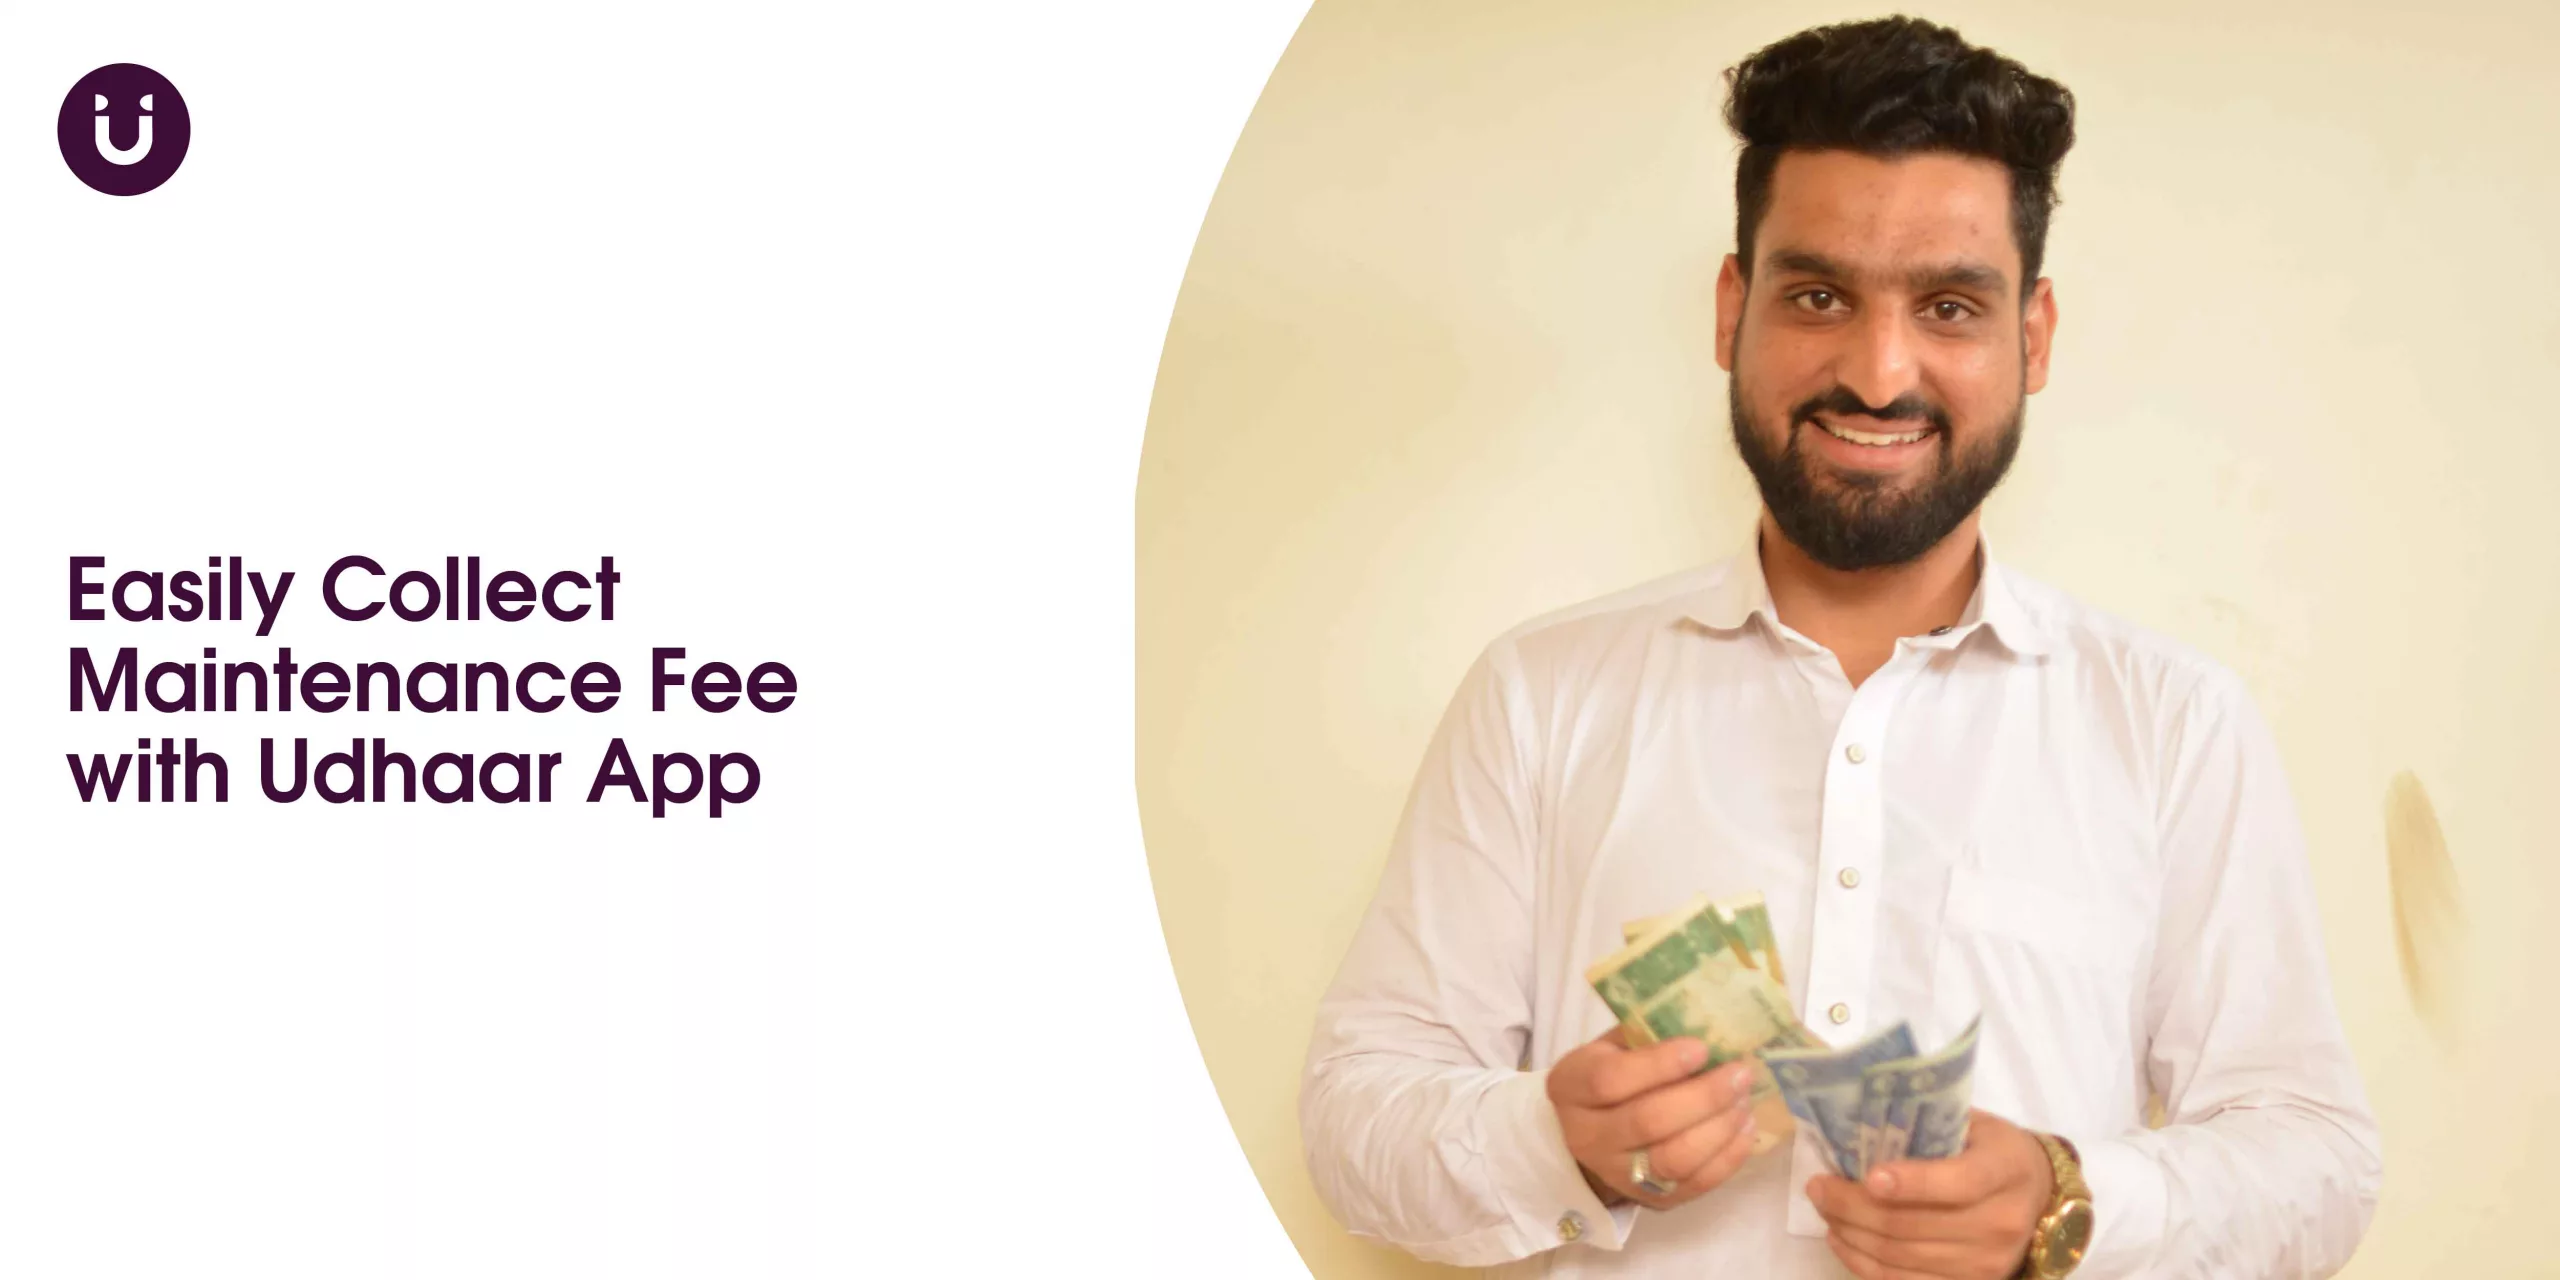 Easily Collect Maintenance Fee with Udhaar App